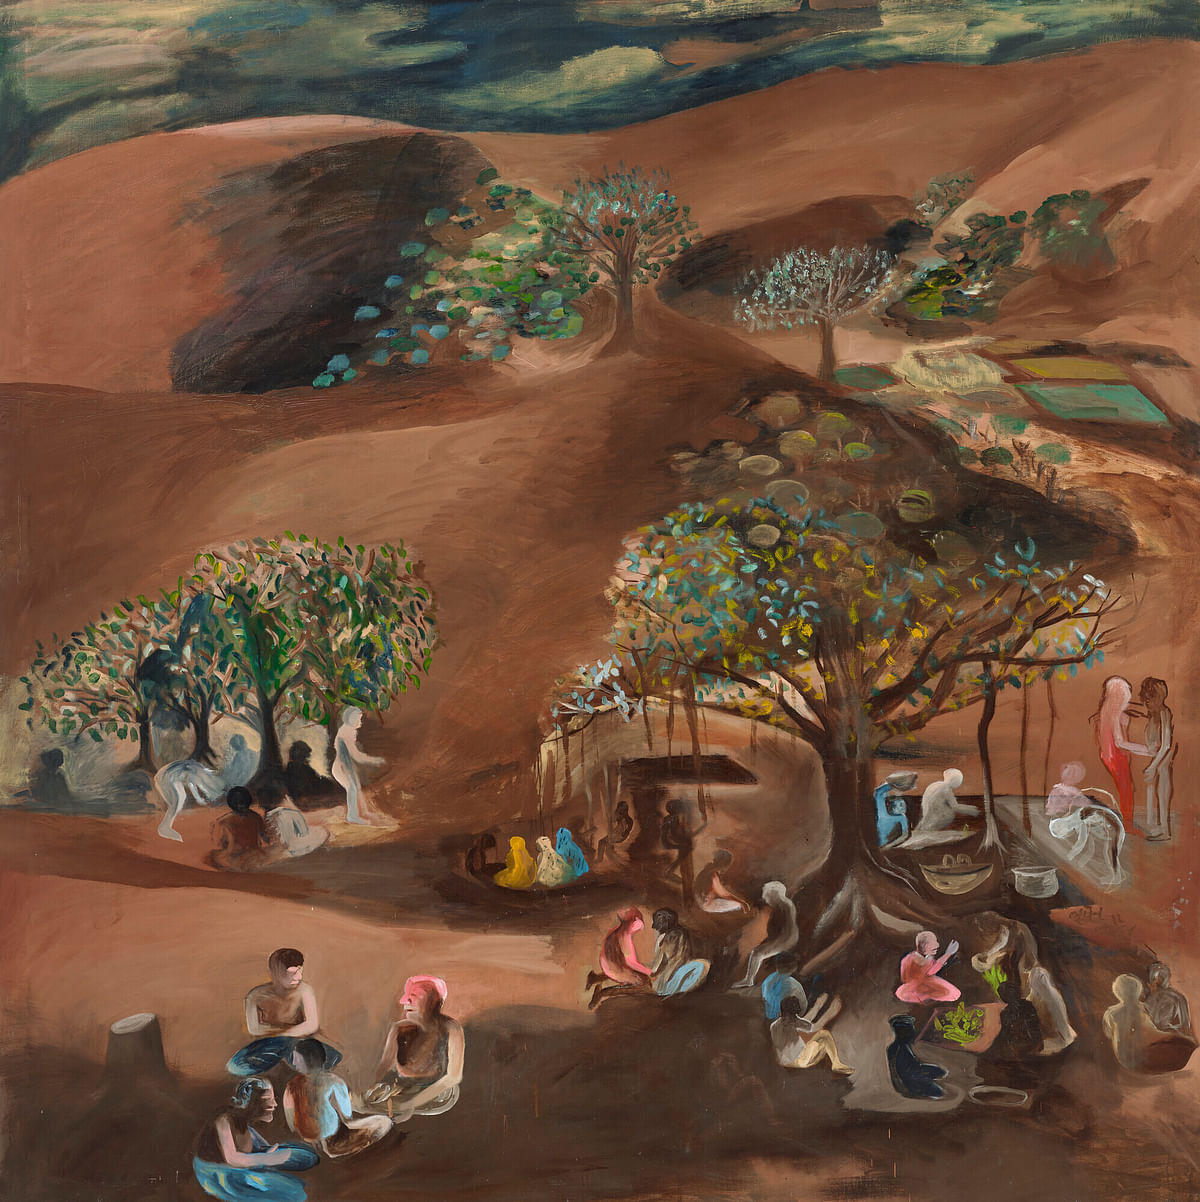 The Banyan Tree by Bhupen Khakhar. Credit: Christie’s Photo